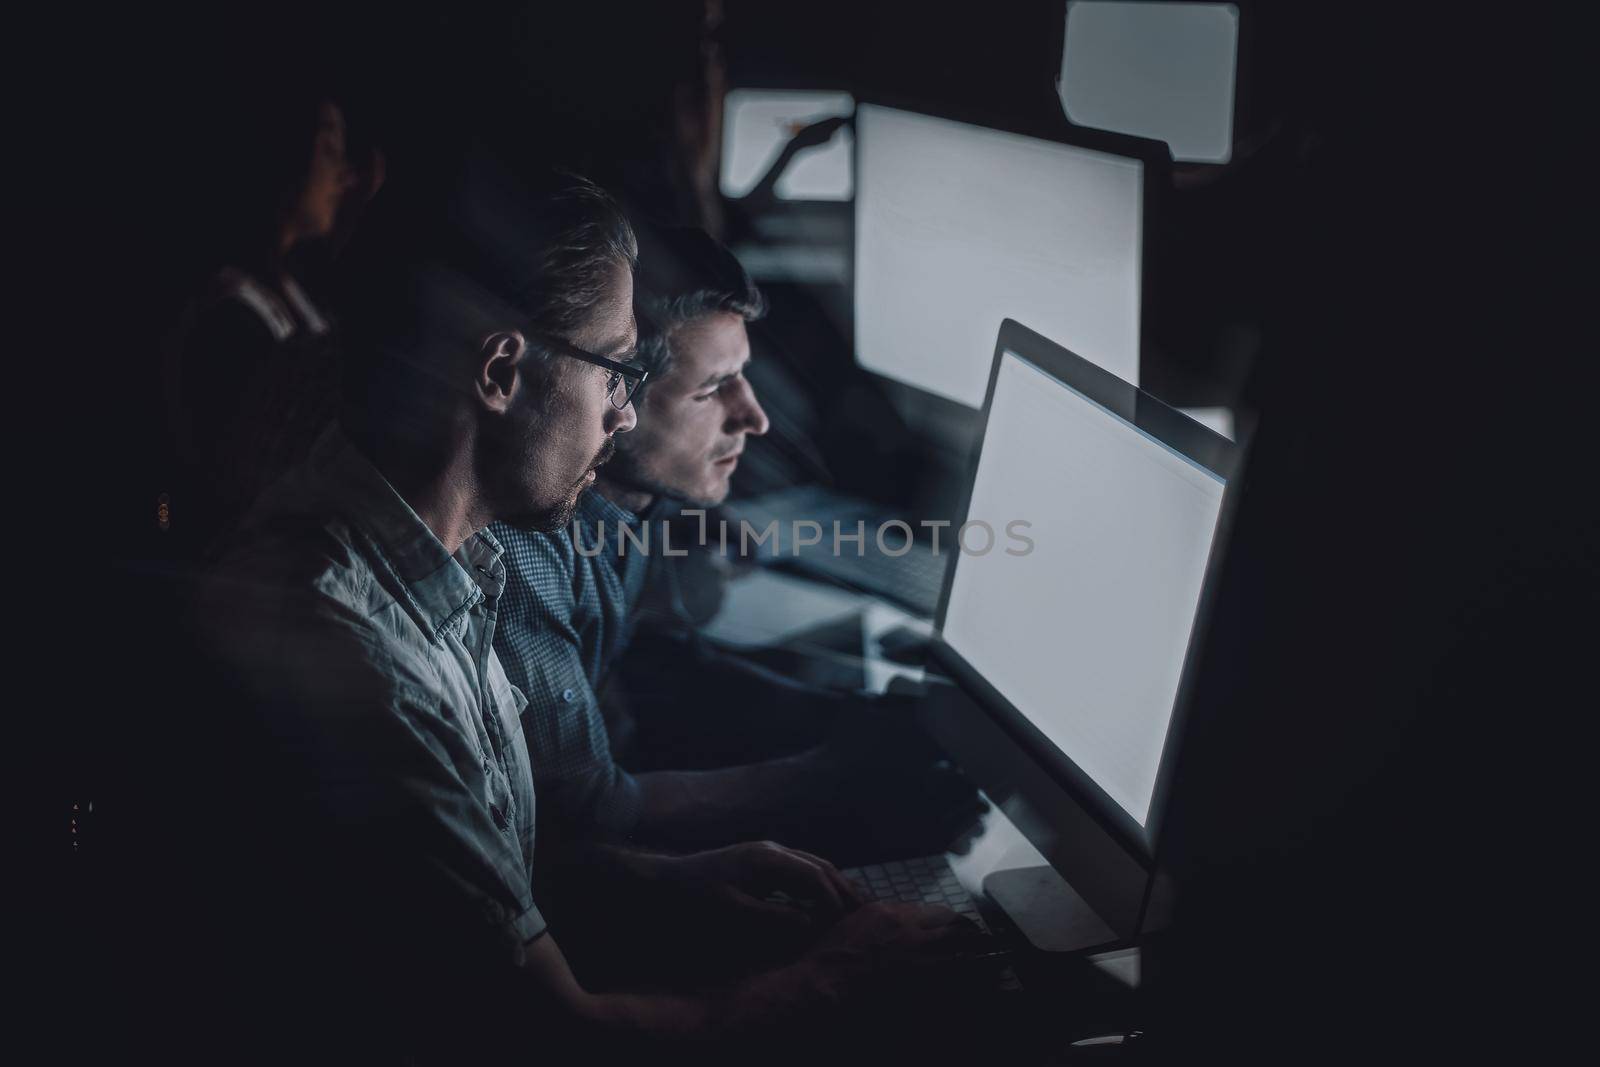 business team works on computers at night.the concept of overtime